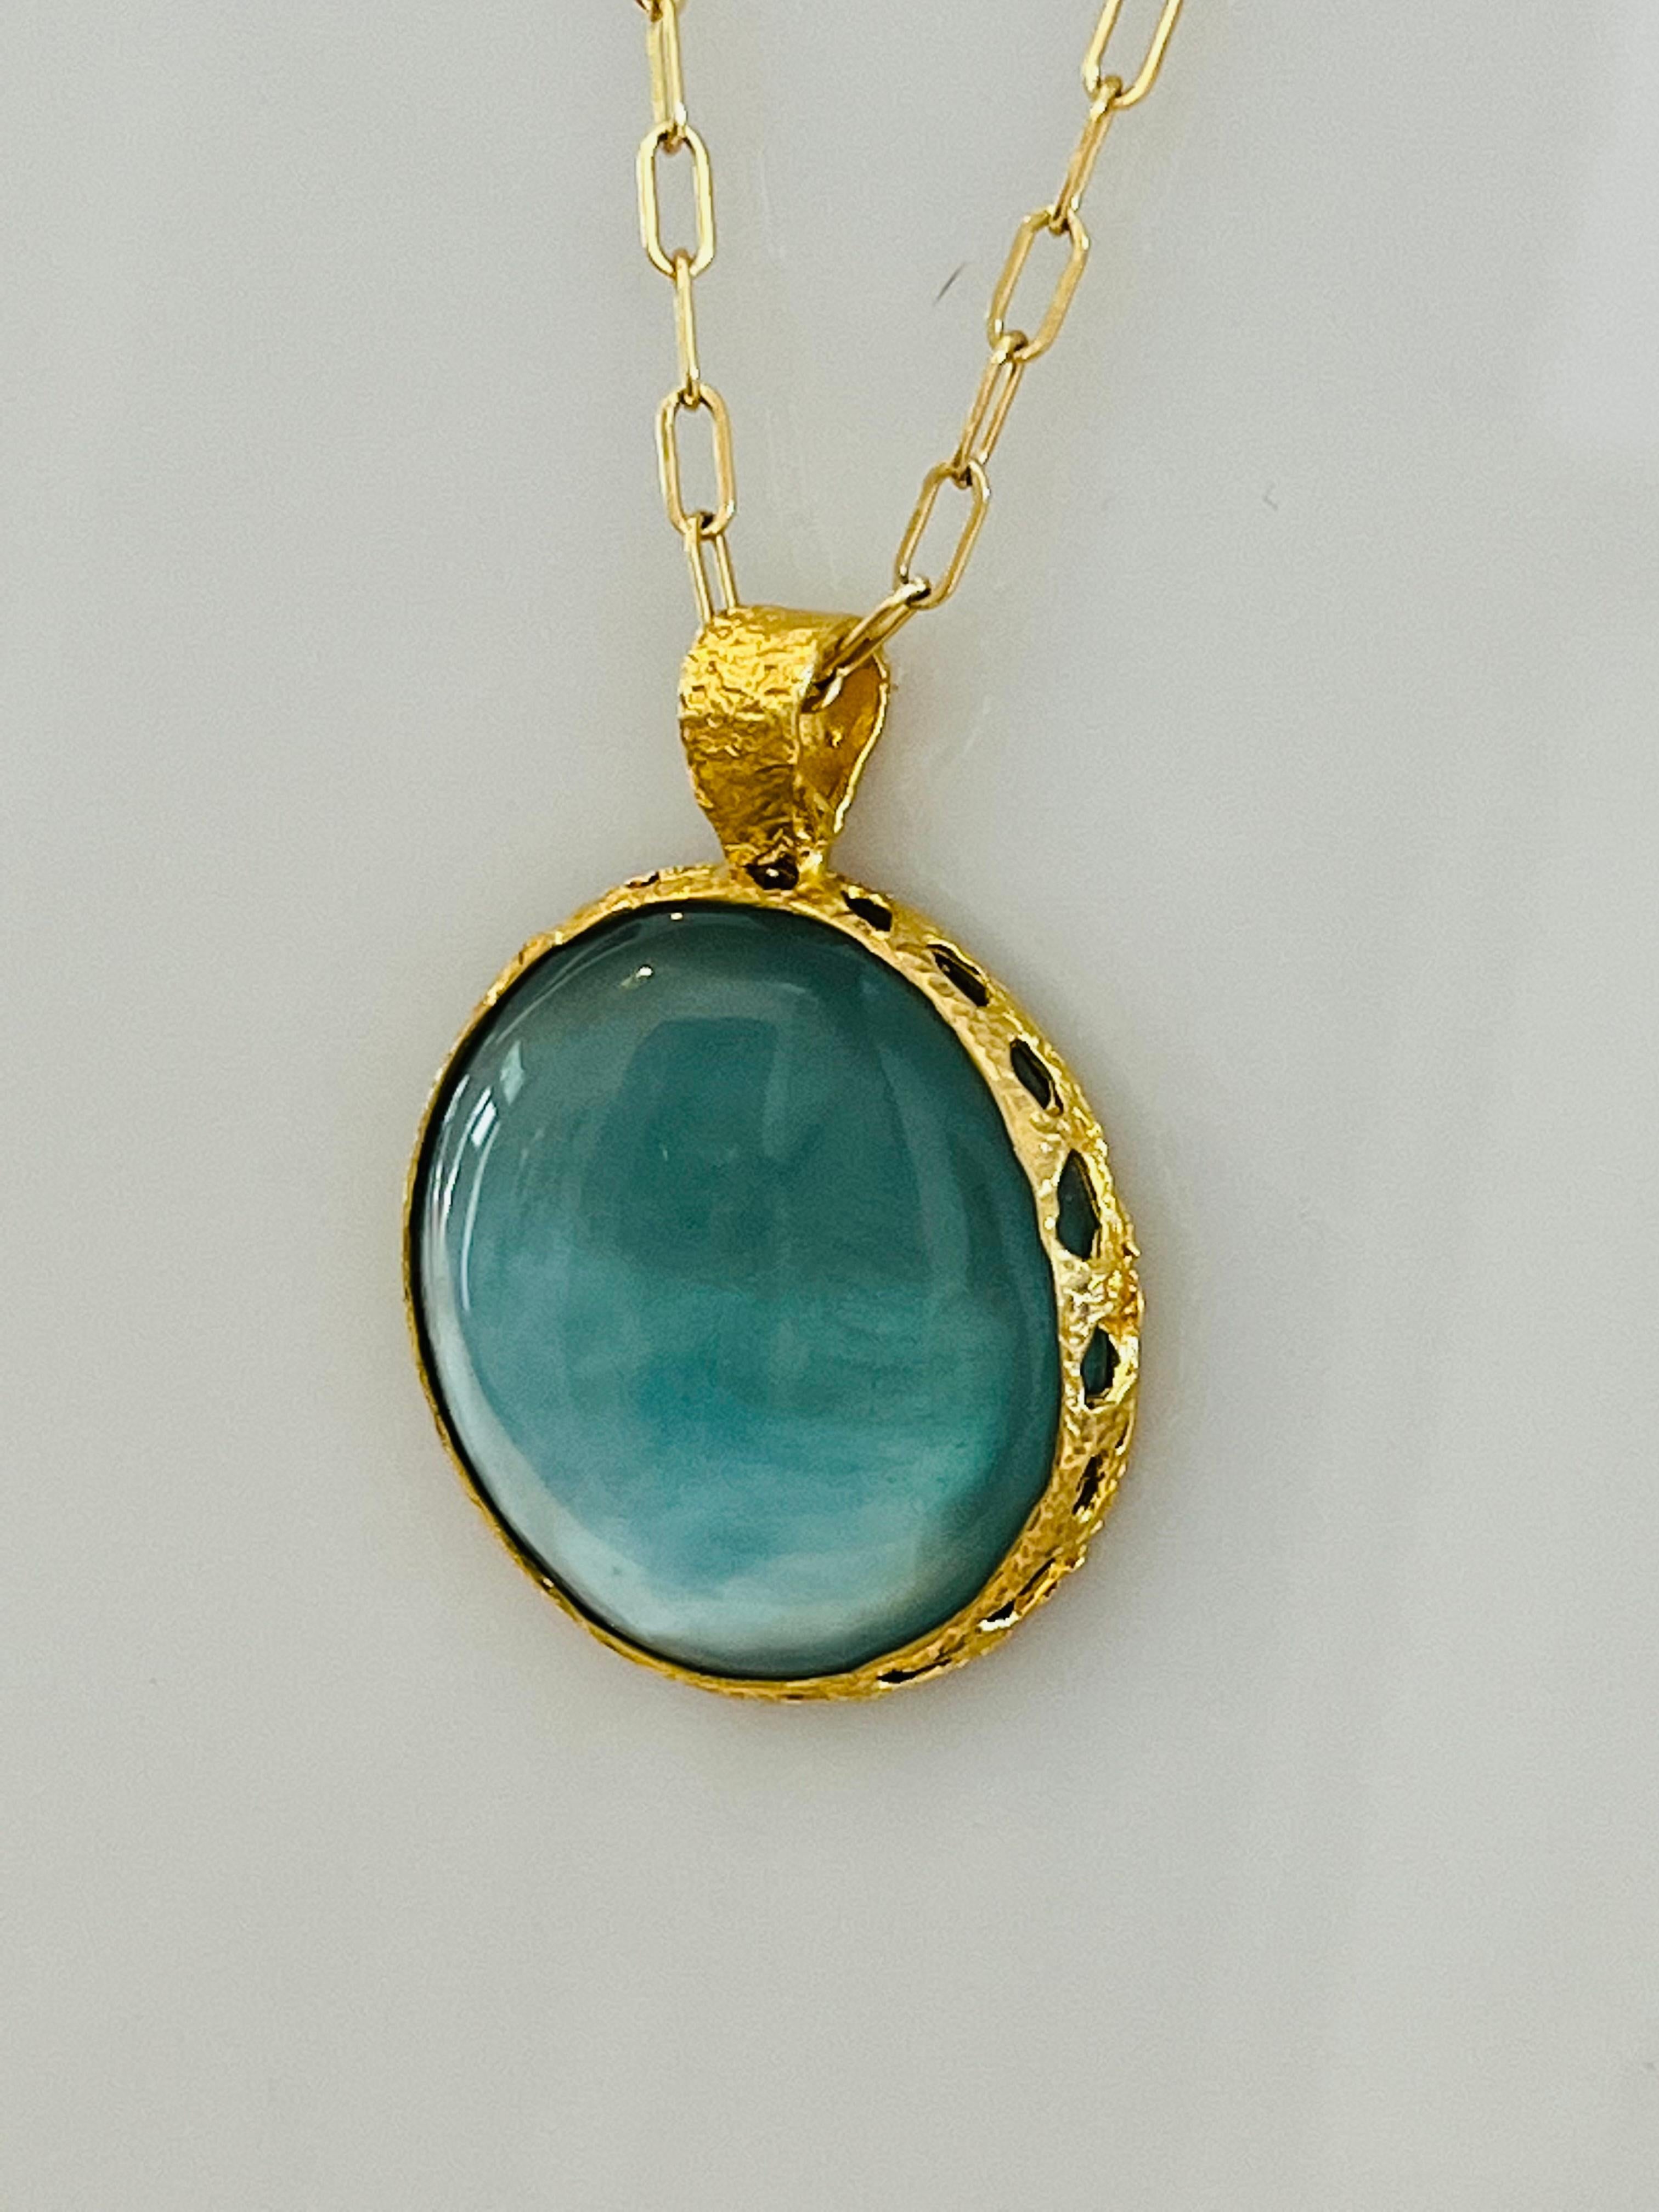 Women's Celeste Reversible Aqua and Mother of Pearl Pendant in 22k Gold, by Tagili